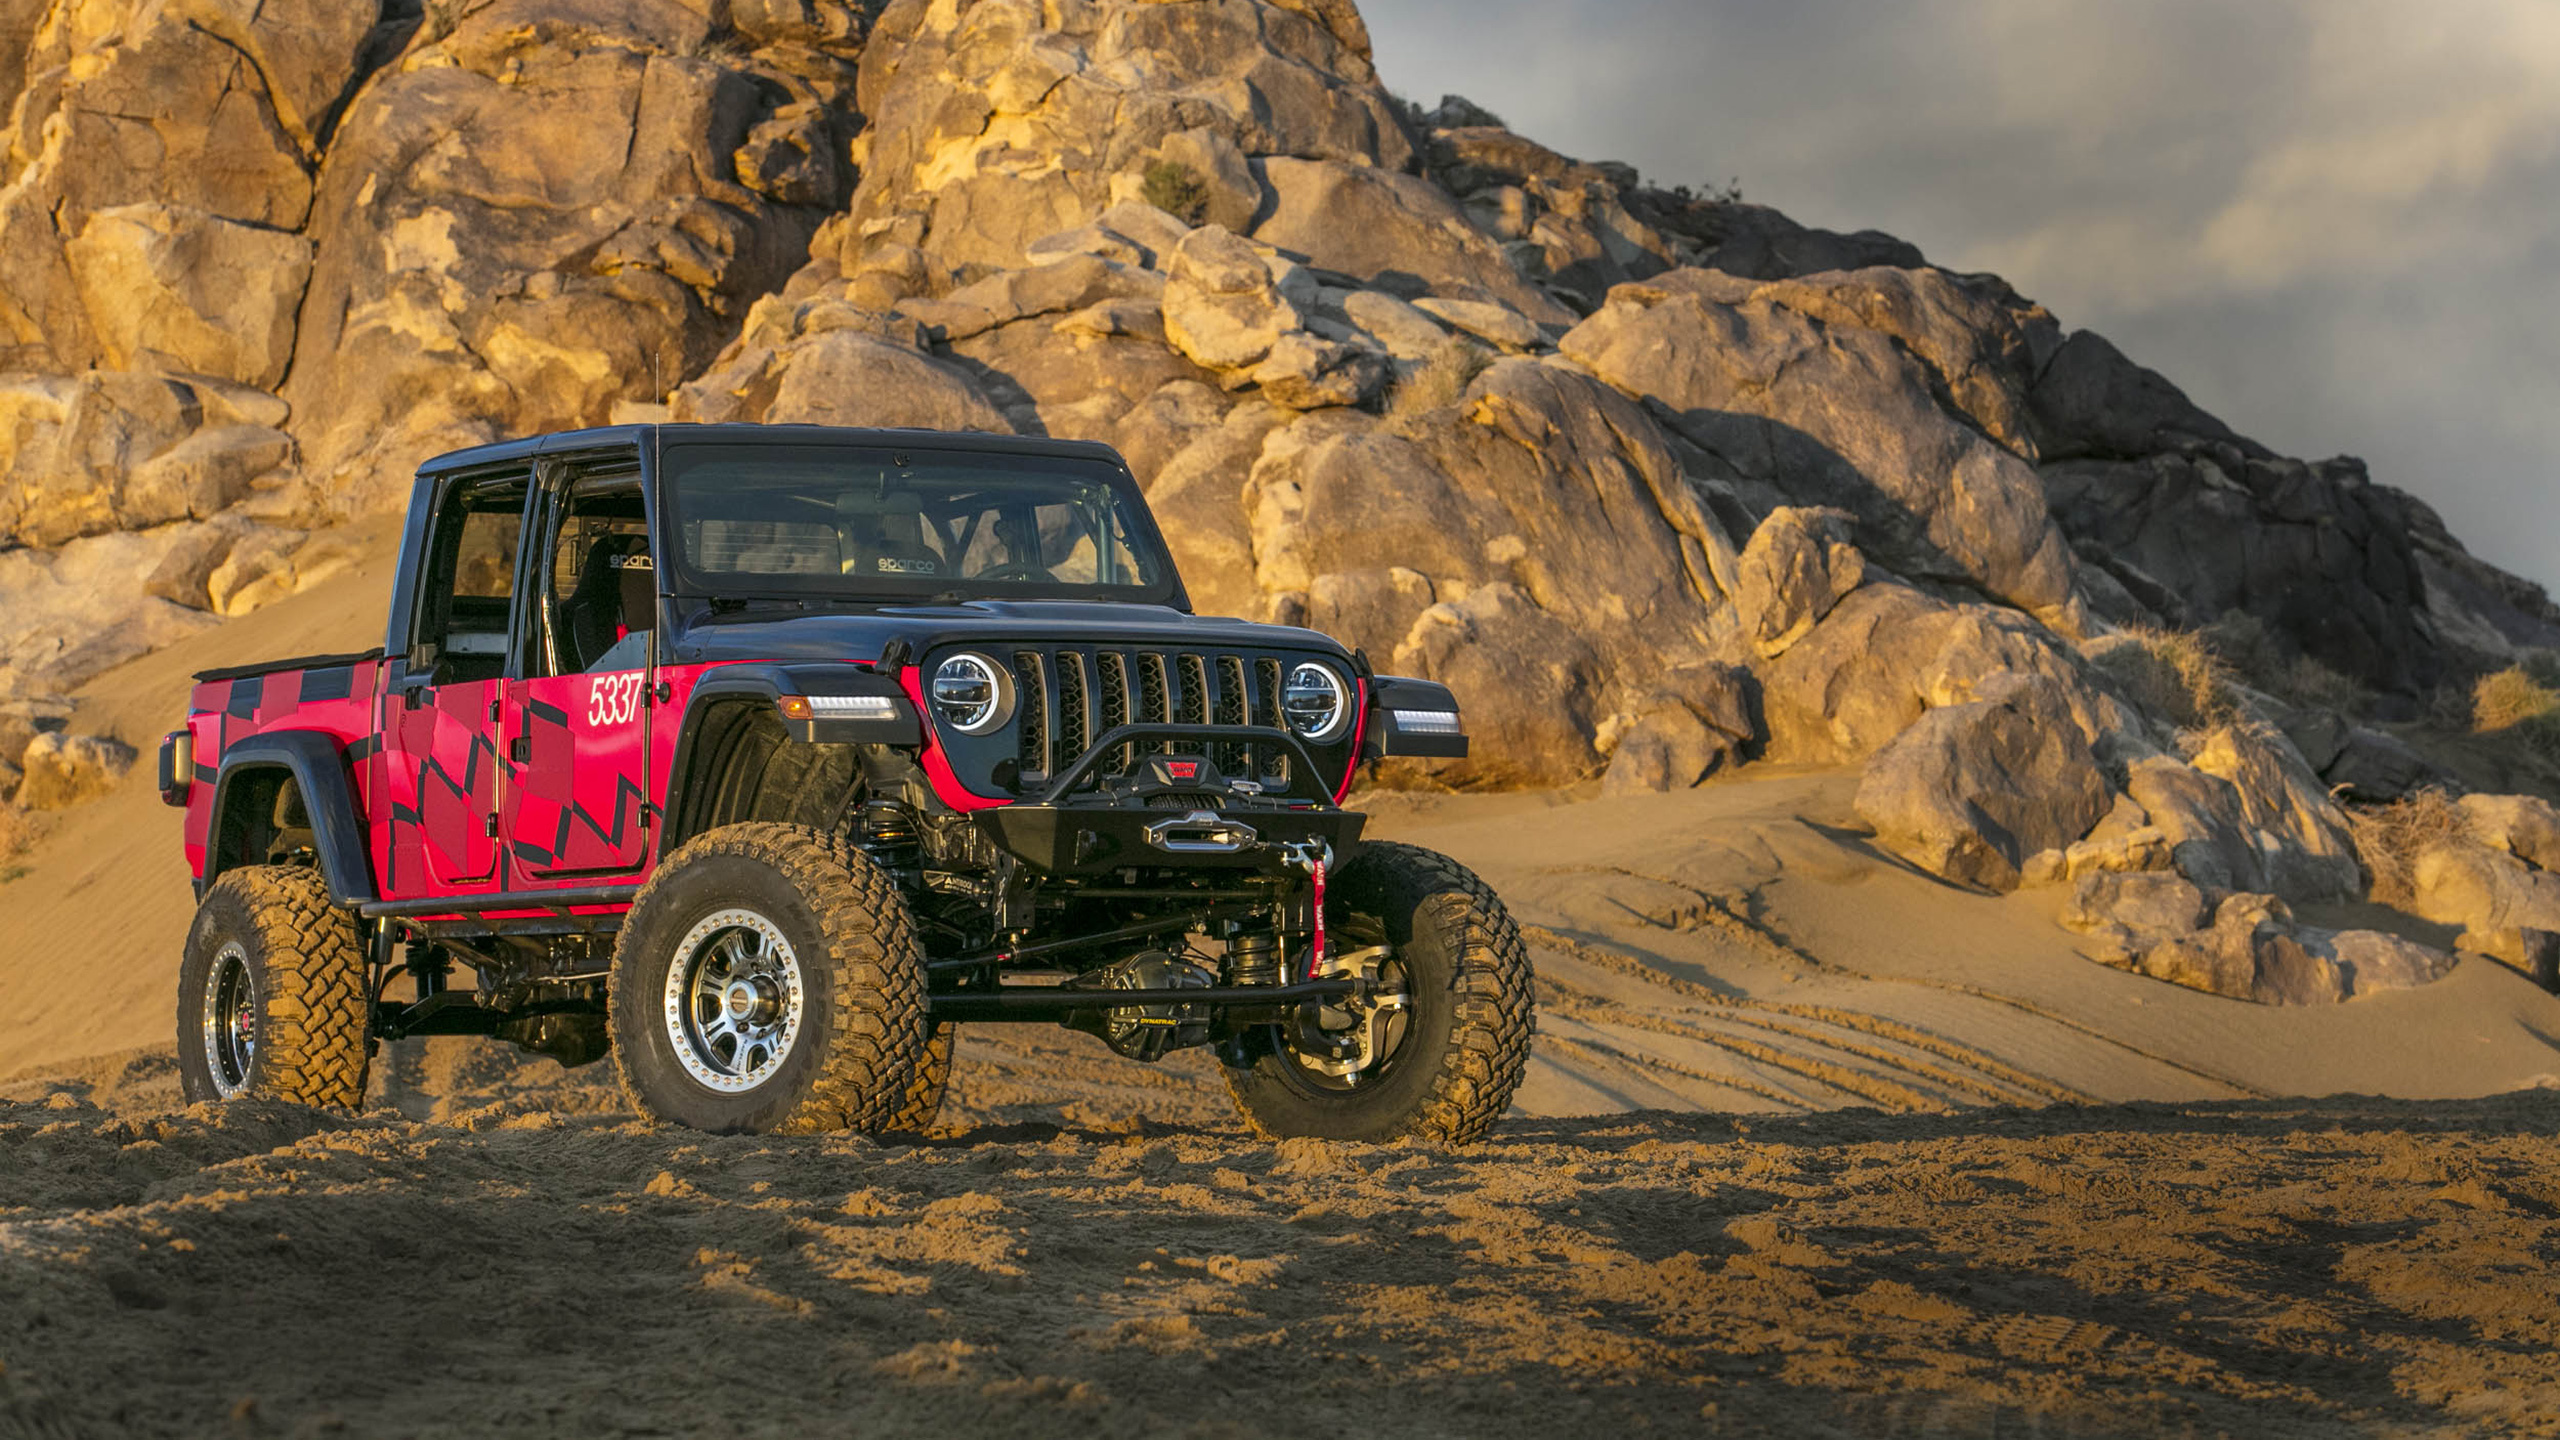 Jeep Gladiator, King of the Hammers race car, 2019 wallpaper, Jeep Rubicon, 2560x1440 HD Desktop